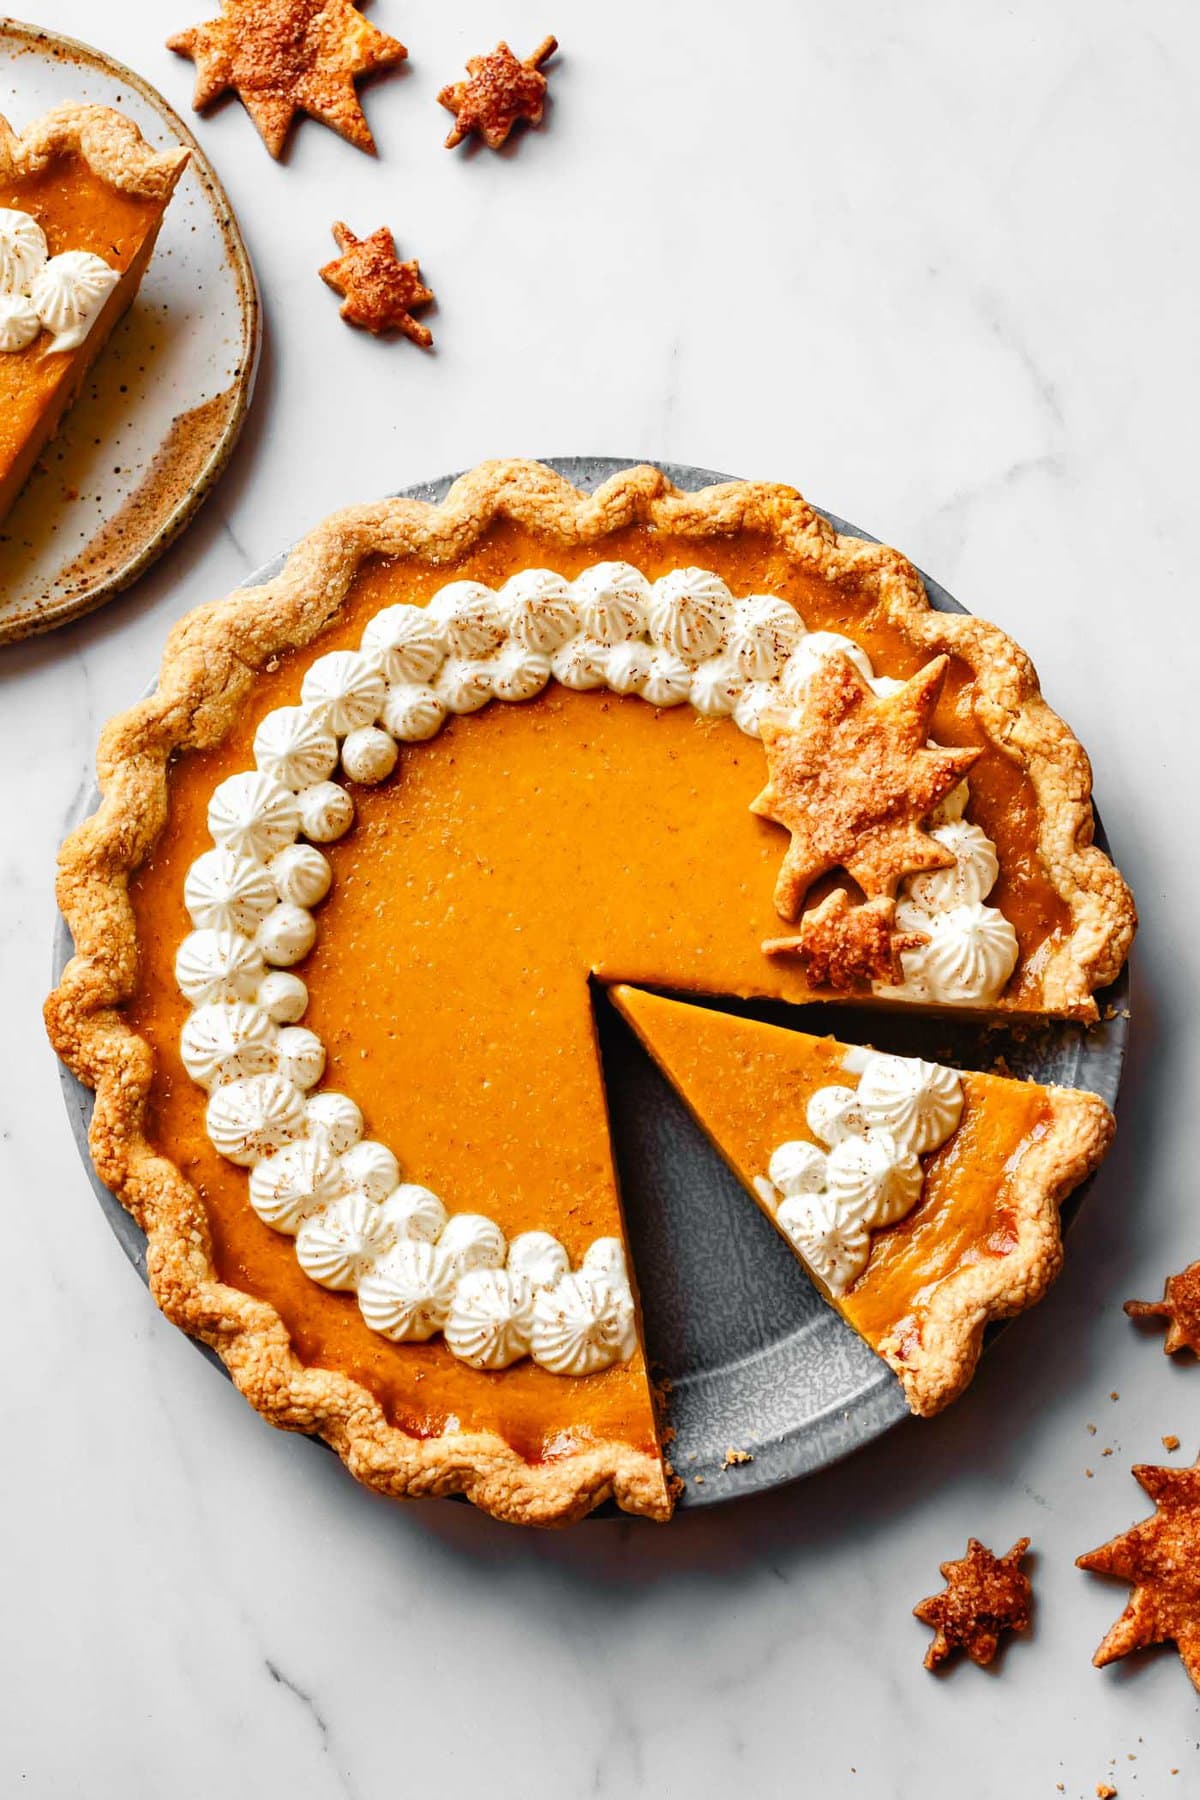 A beautiful gluten-free pumpkin pie is on a marble surface with a slice cut out and leaf cutouts on the surface